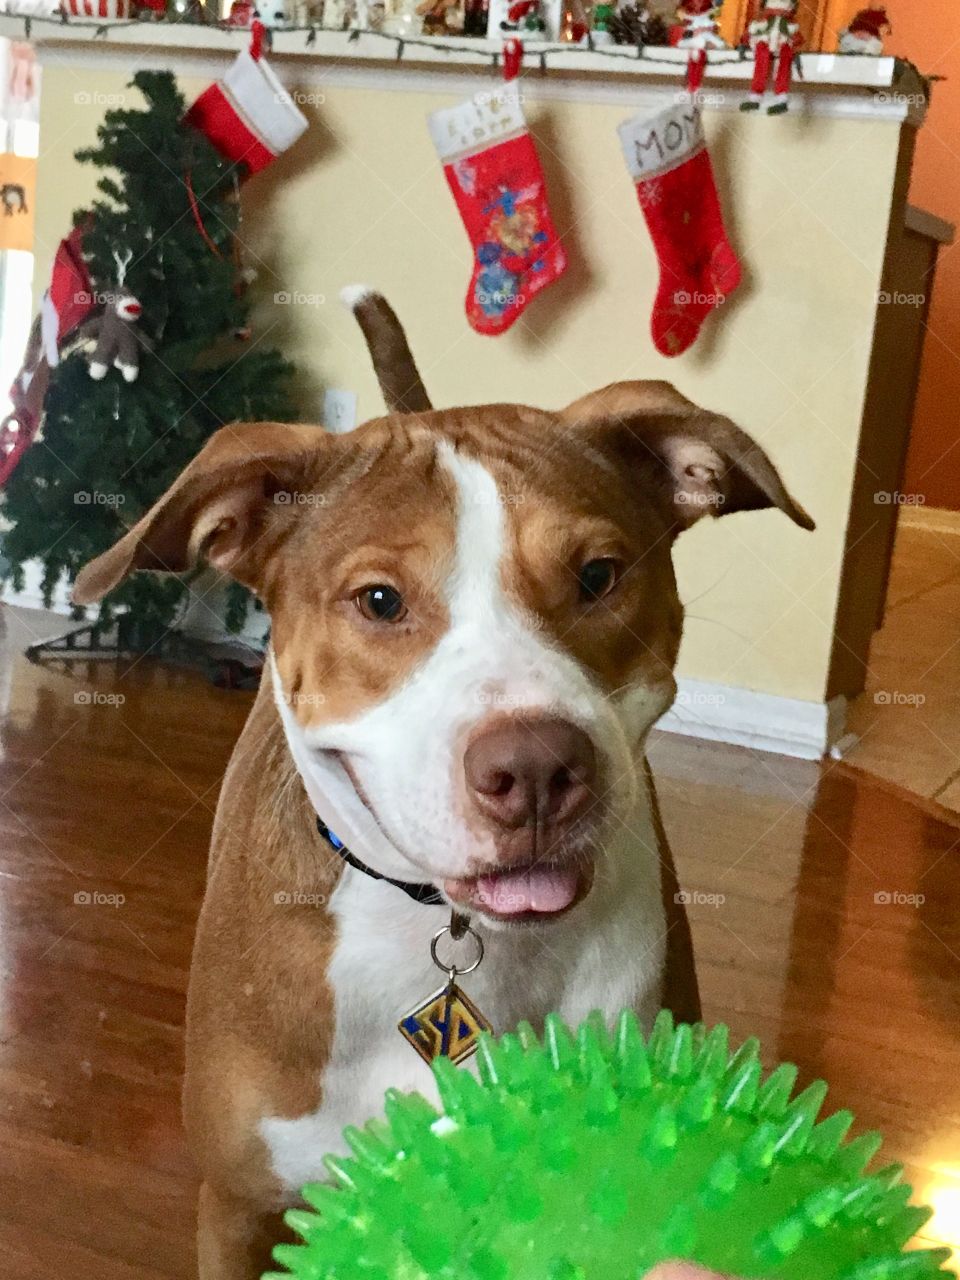 Dog with tongue sticking out looking at a green ball